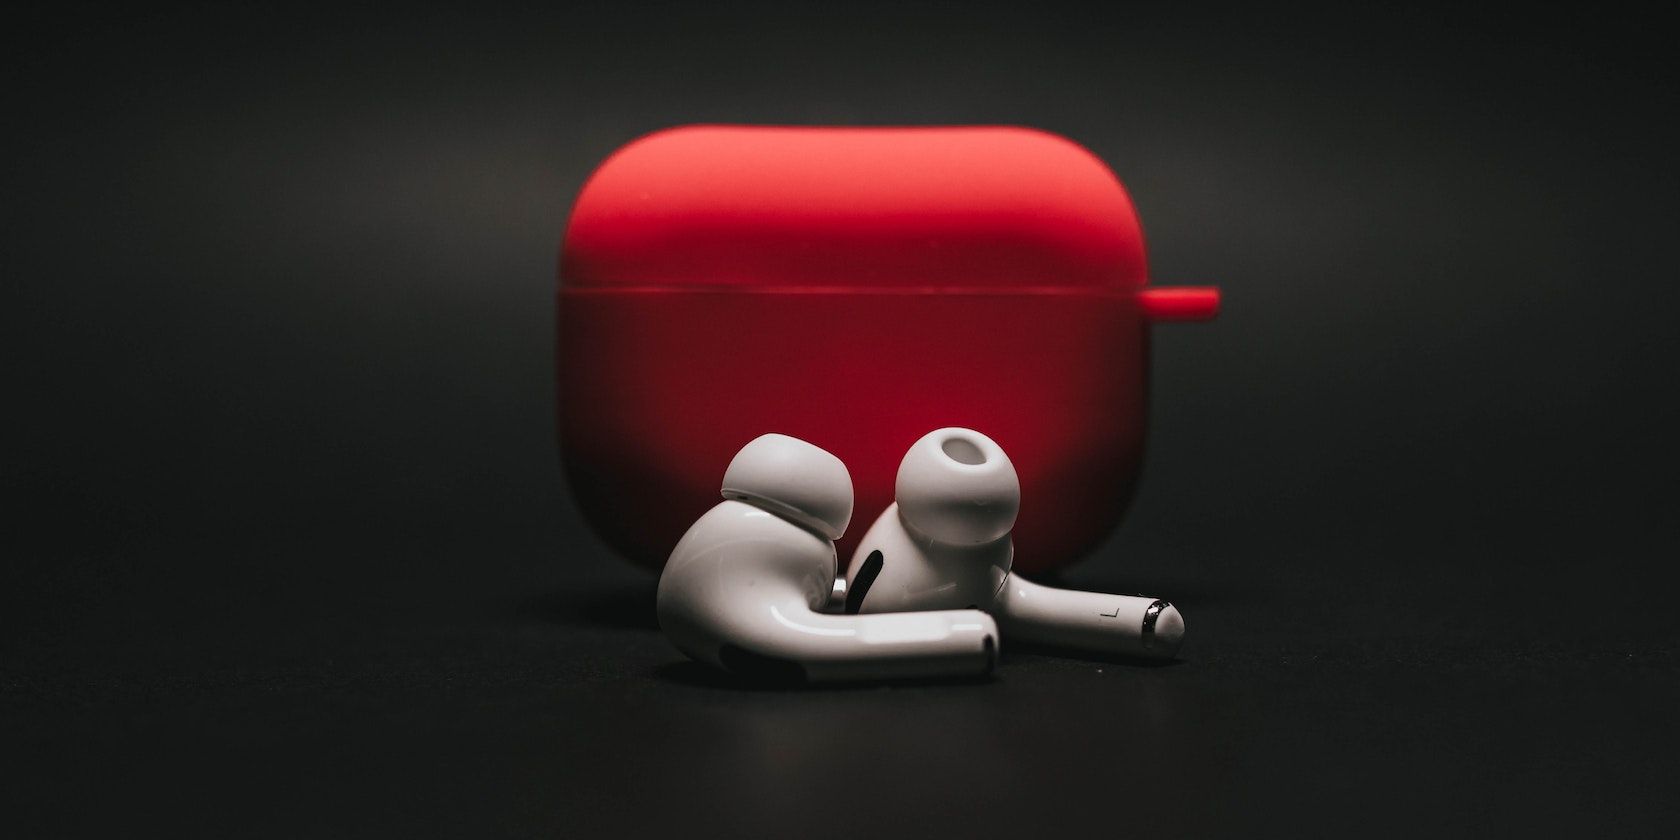 White AirPods With a Red Case on a Black Background